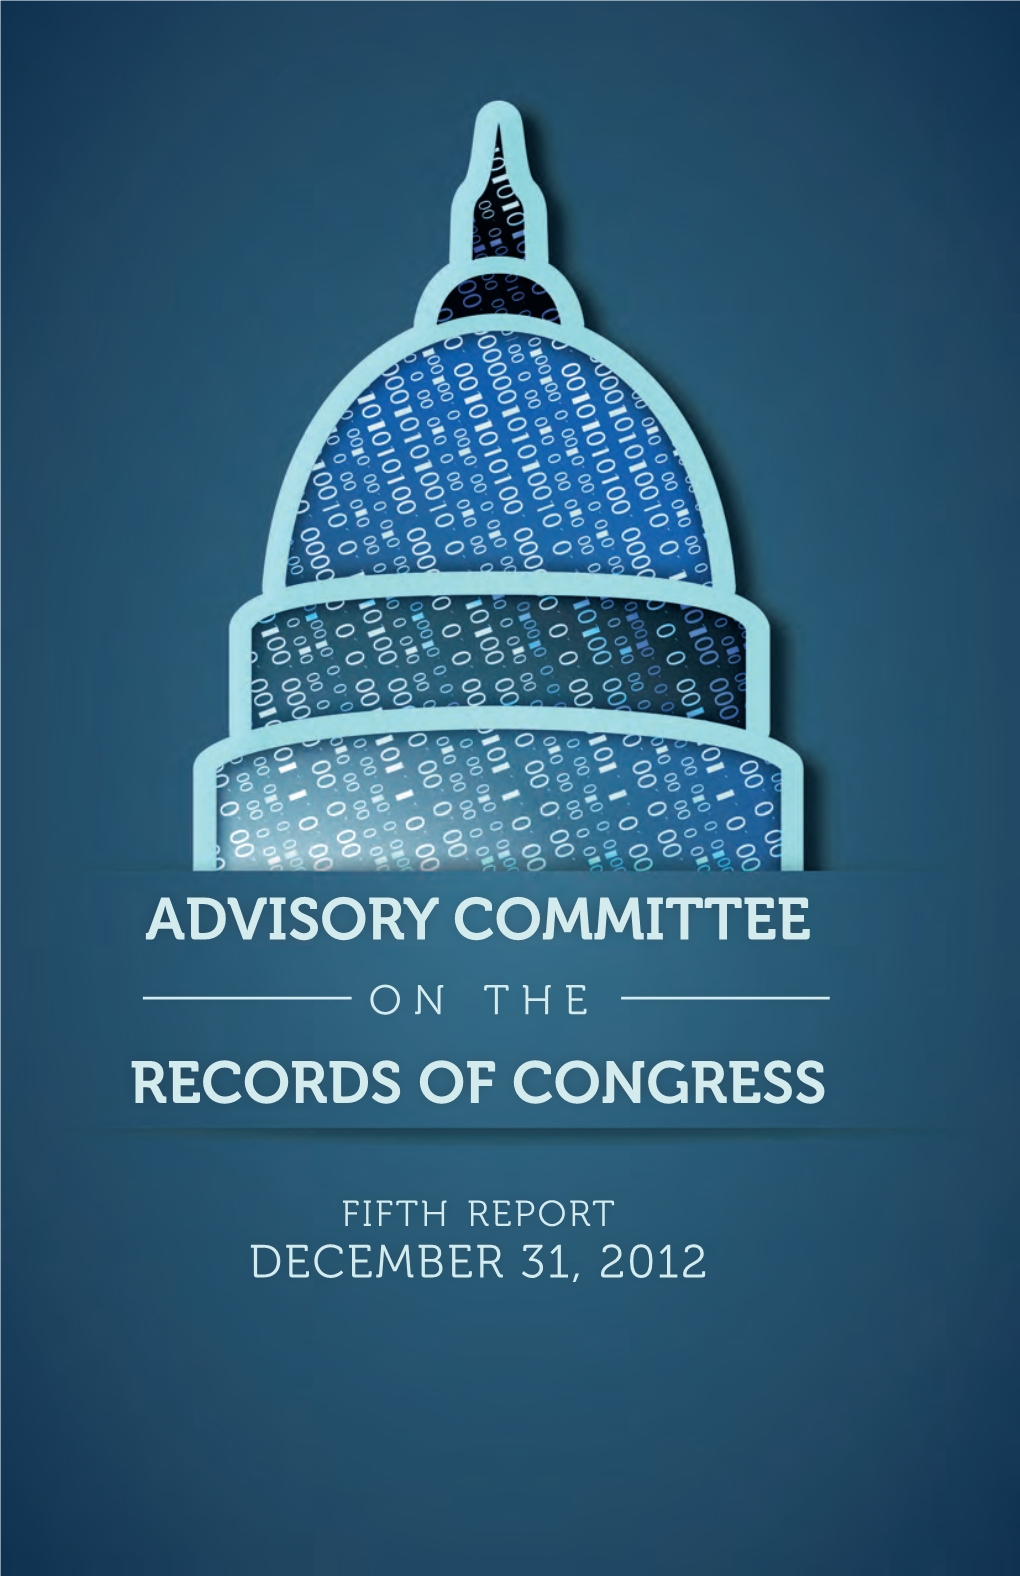 Fifth Report of the Advisory Committee on the Records of Congress